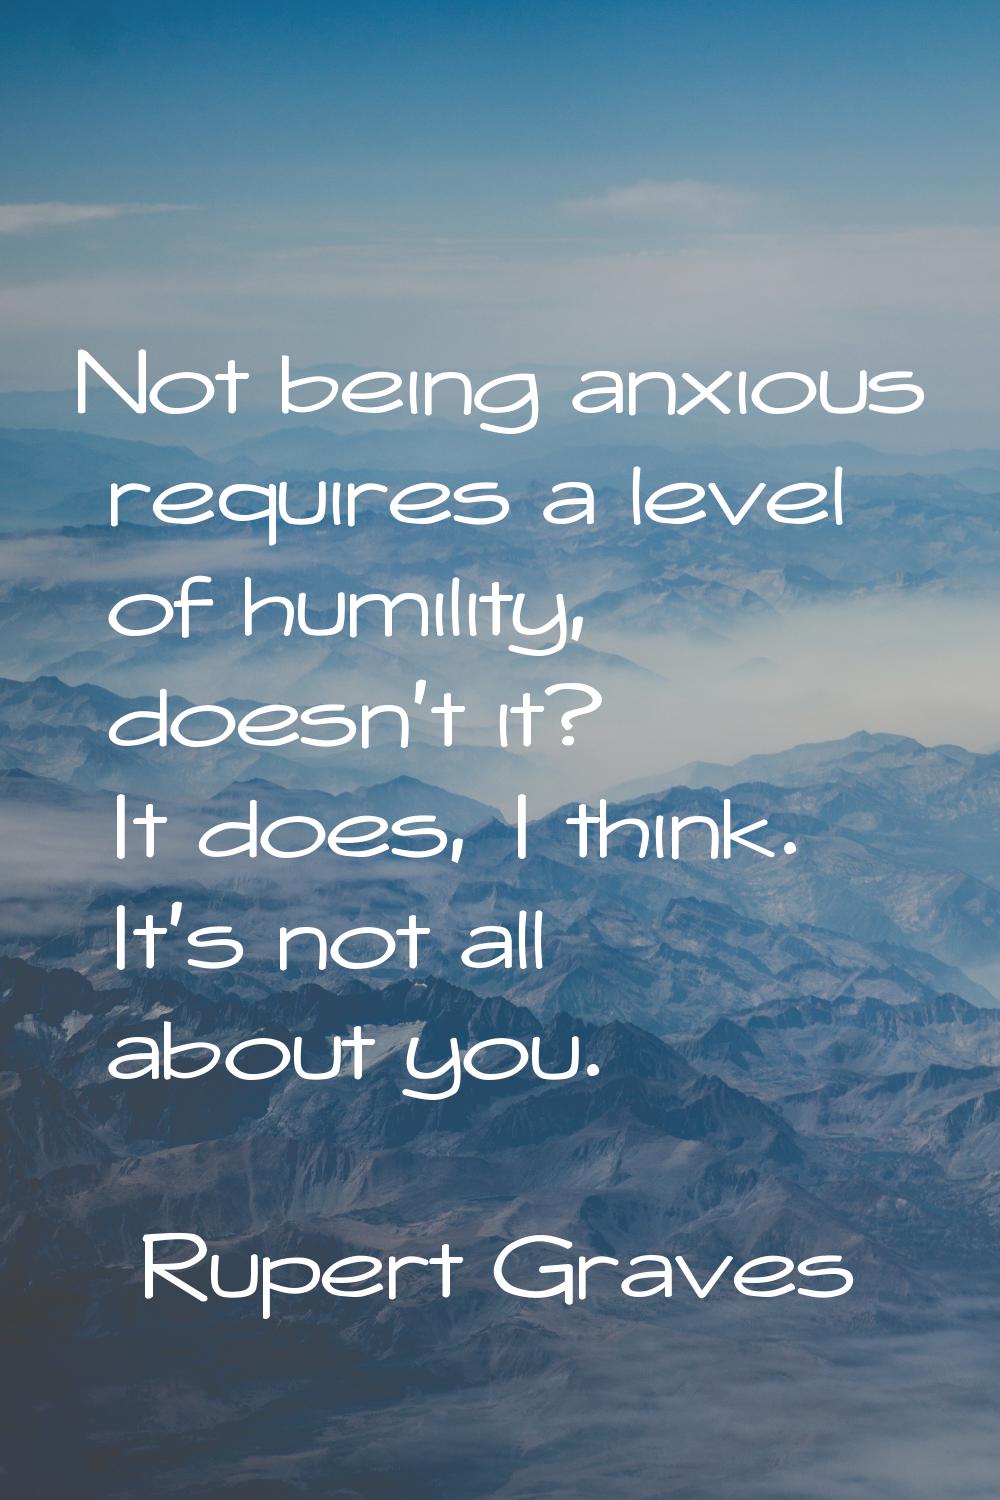 Not being anxious requires a level of humility, doesn't it? It does, I think. It's not all about yo